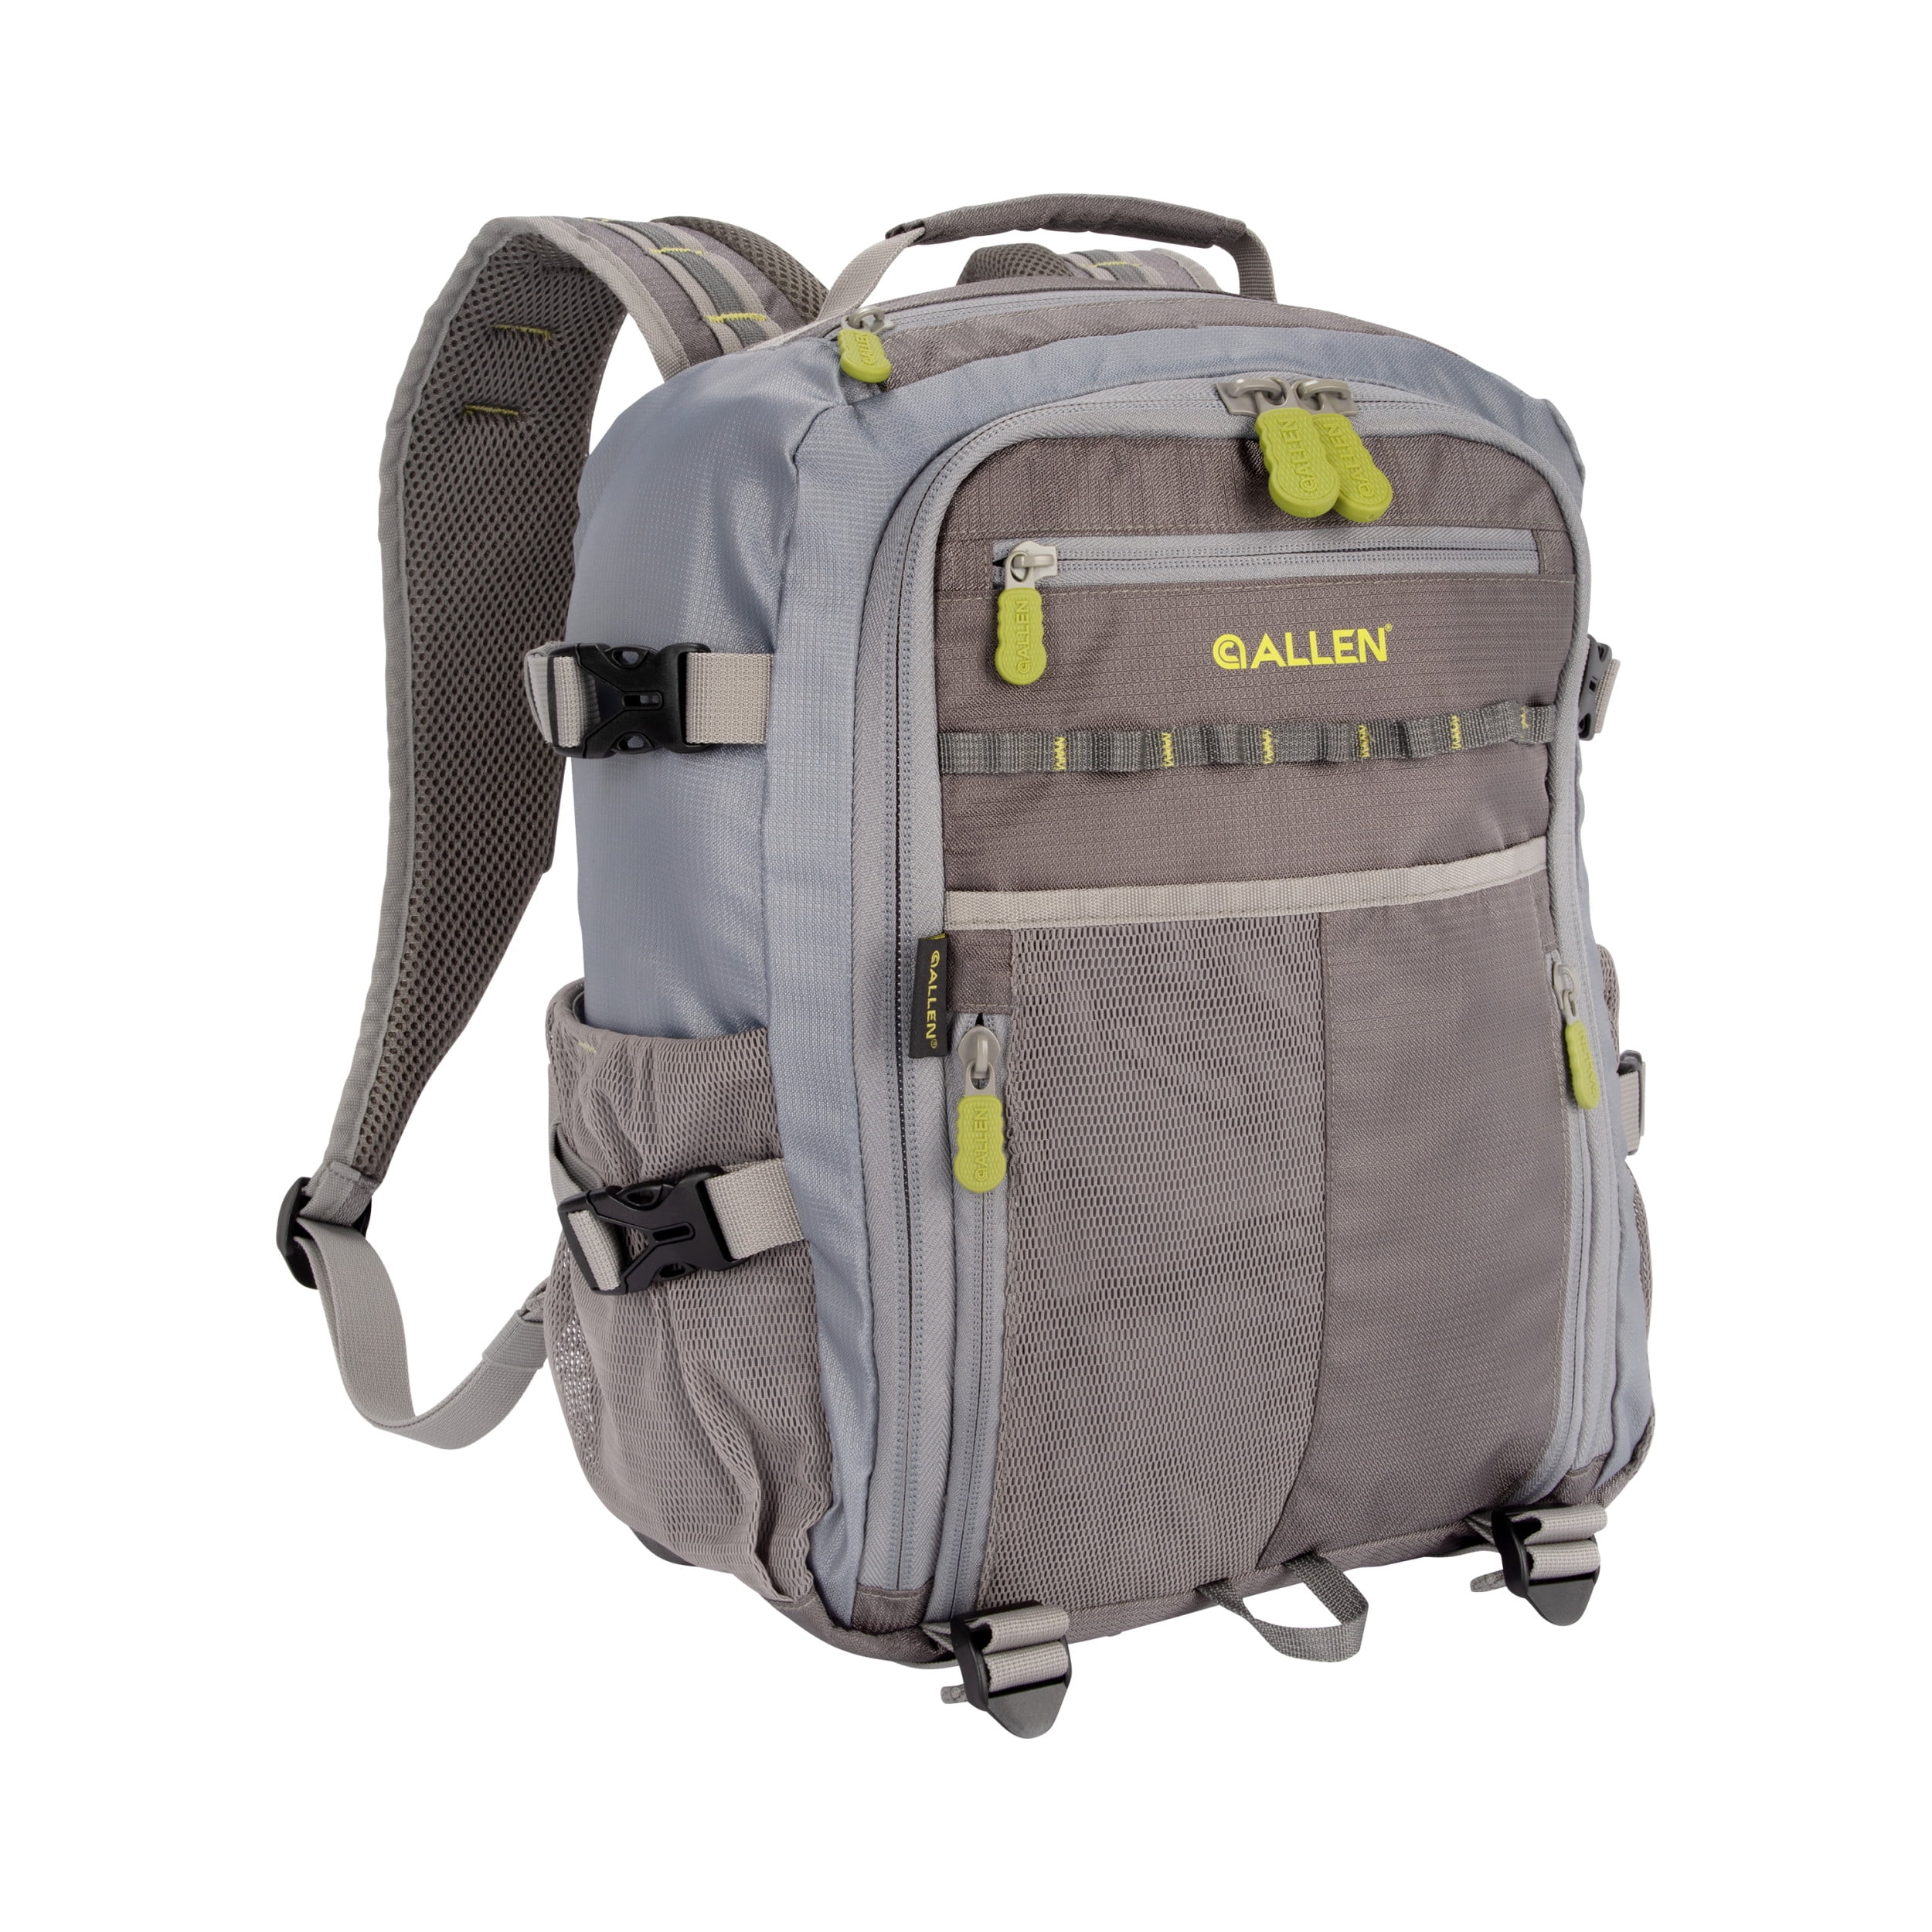 Allen Company Chatfield Compact Fishing Backpack, 12L x 6W x 15H, 17.6  liters, Gray/Lime 